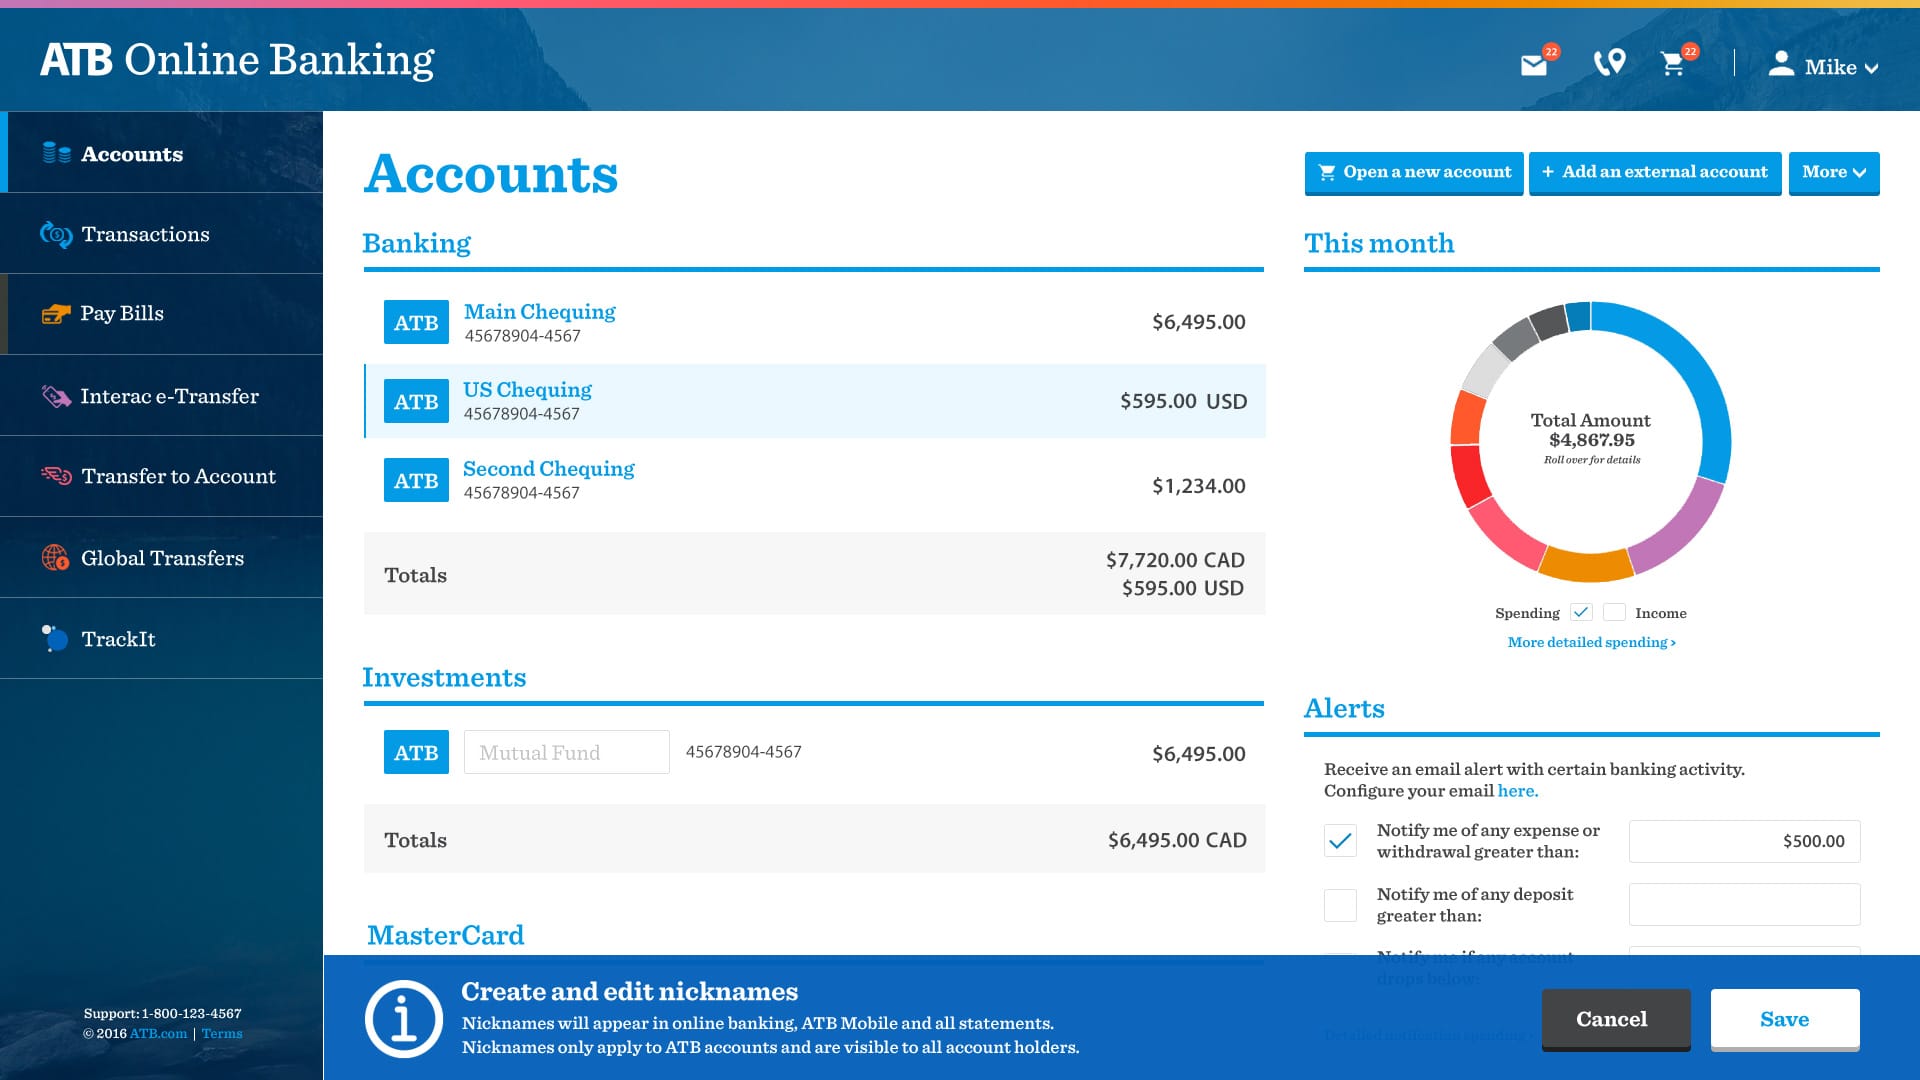 ATB Online accounts redesign